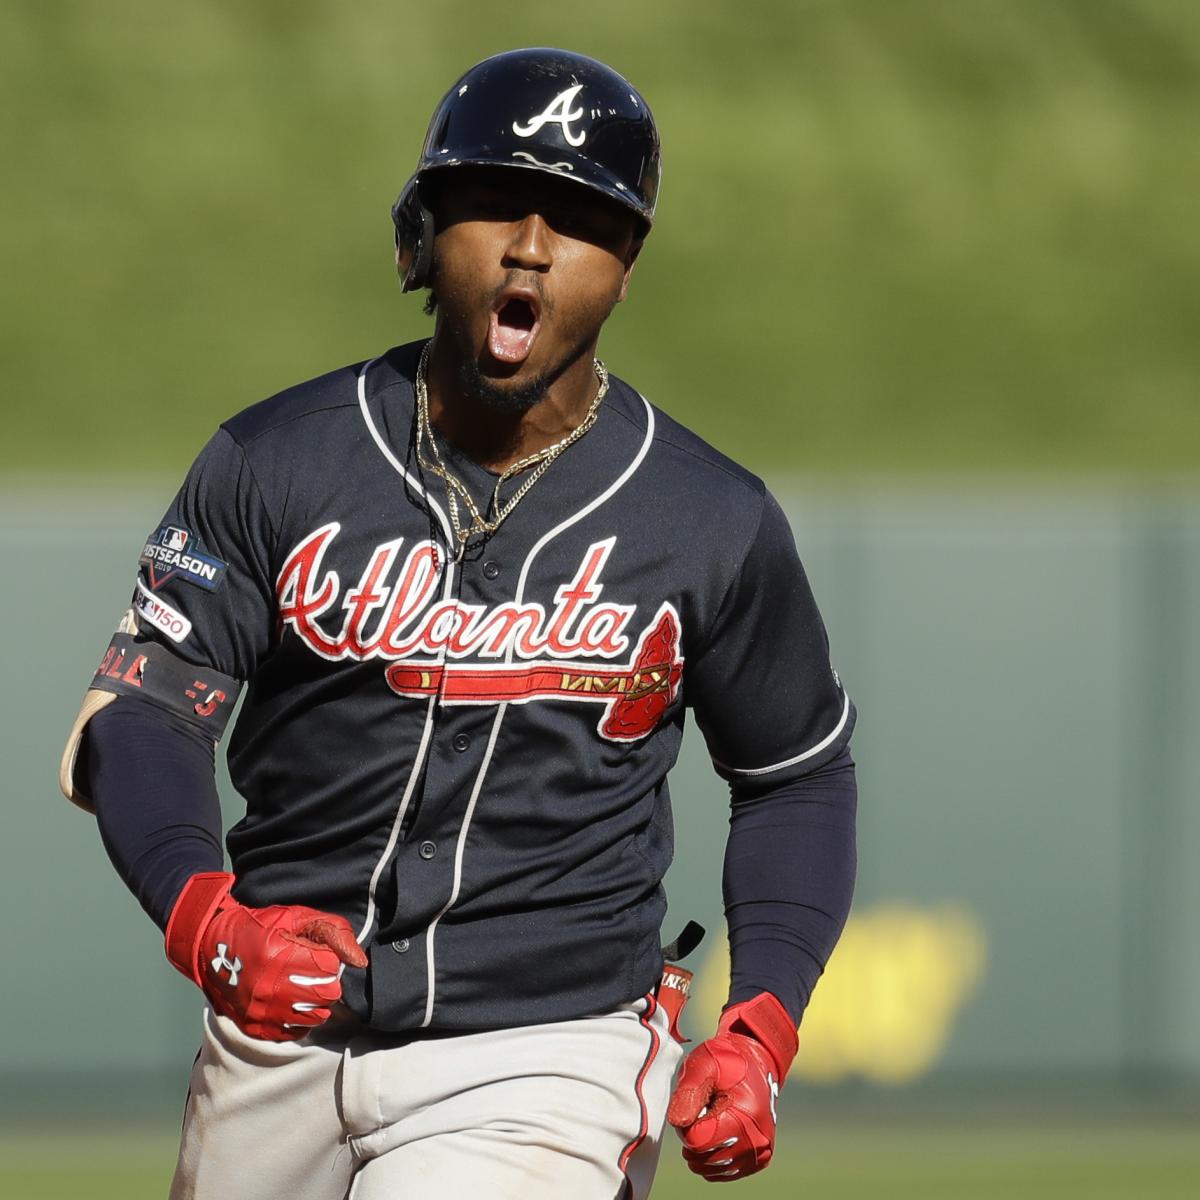 MLB Position Power Rankings for Every Team's Projected Second Basemen